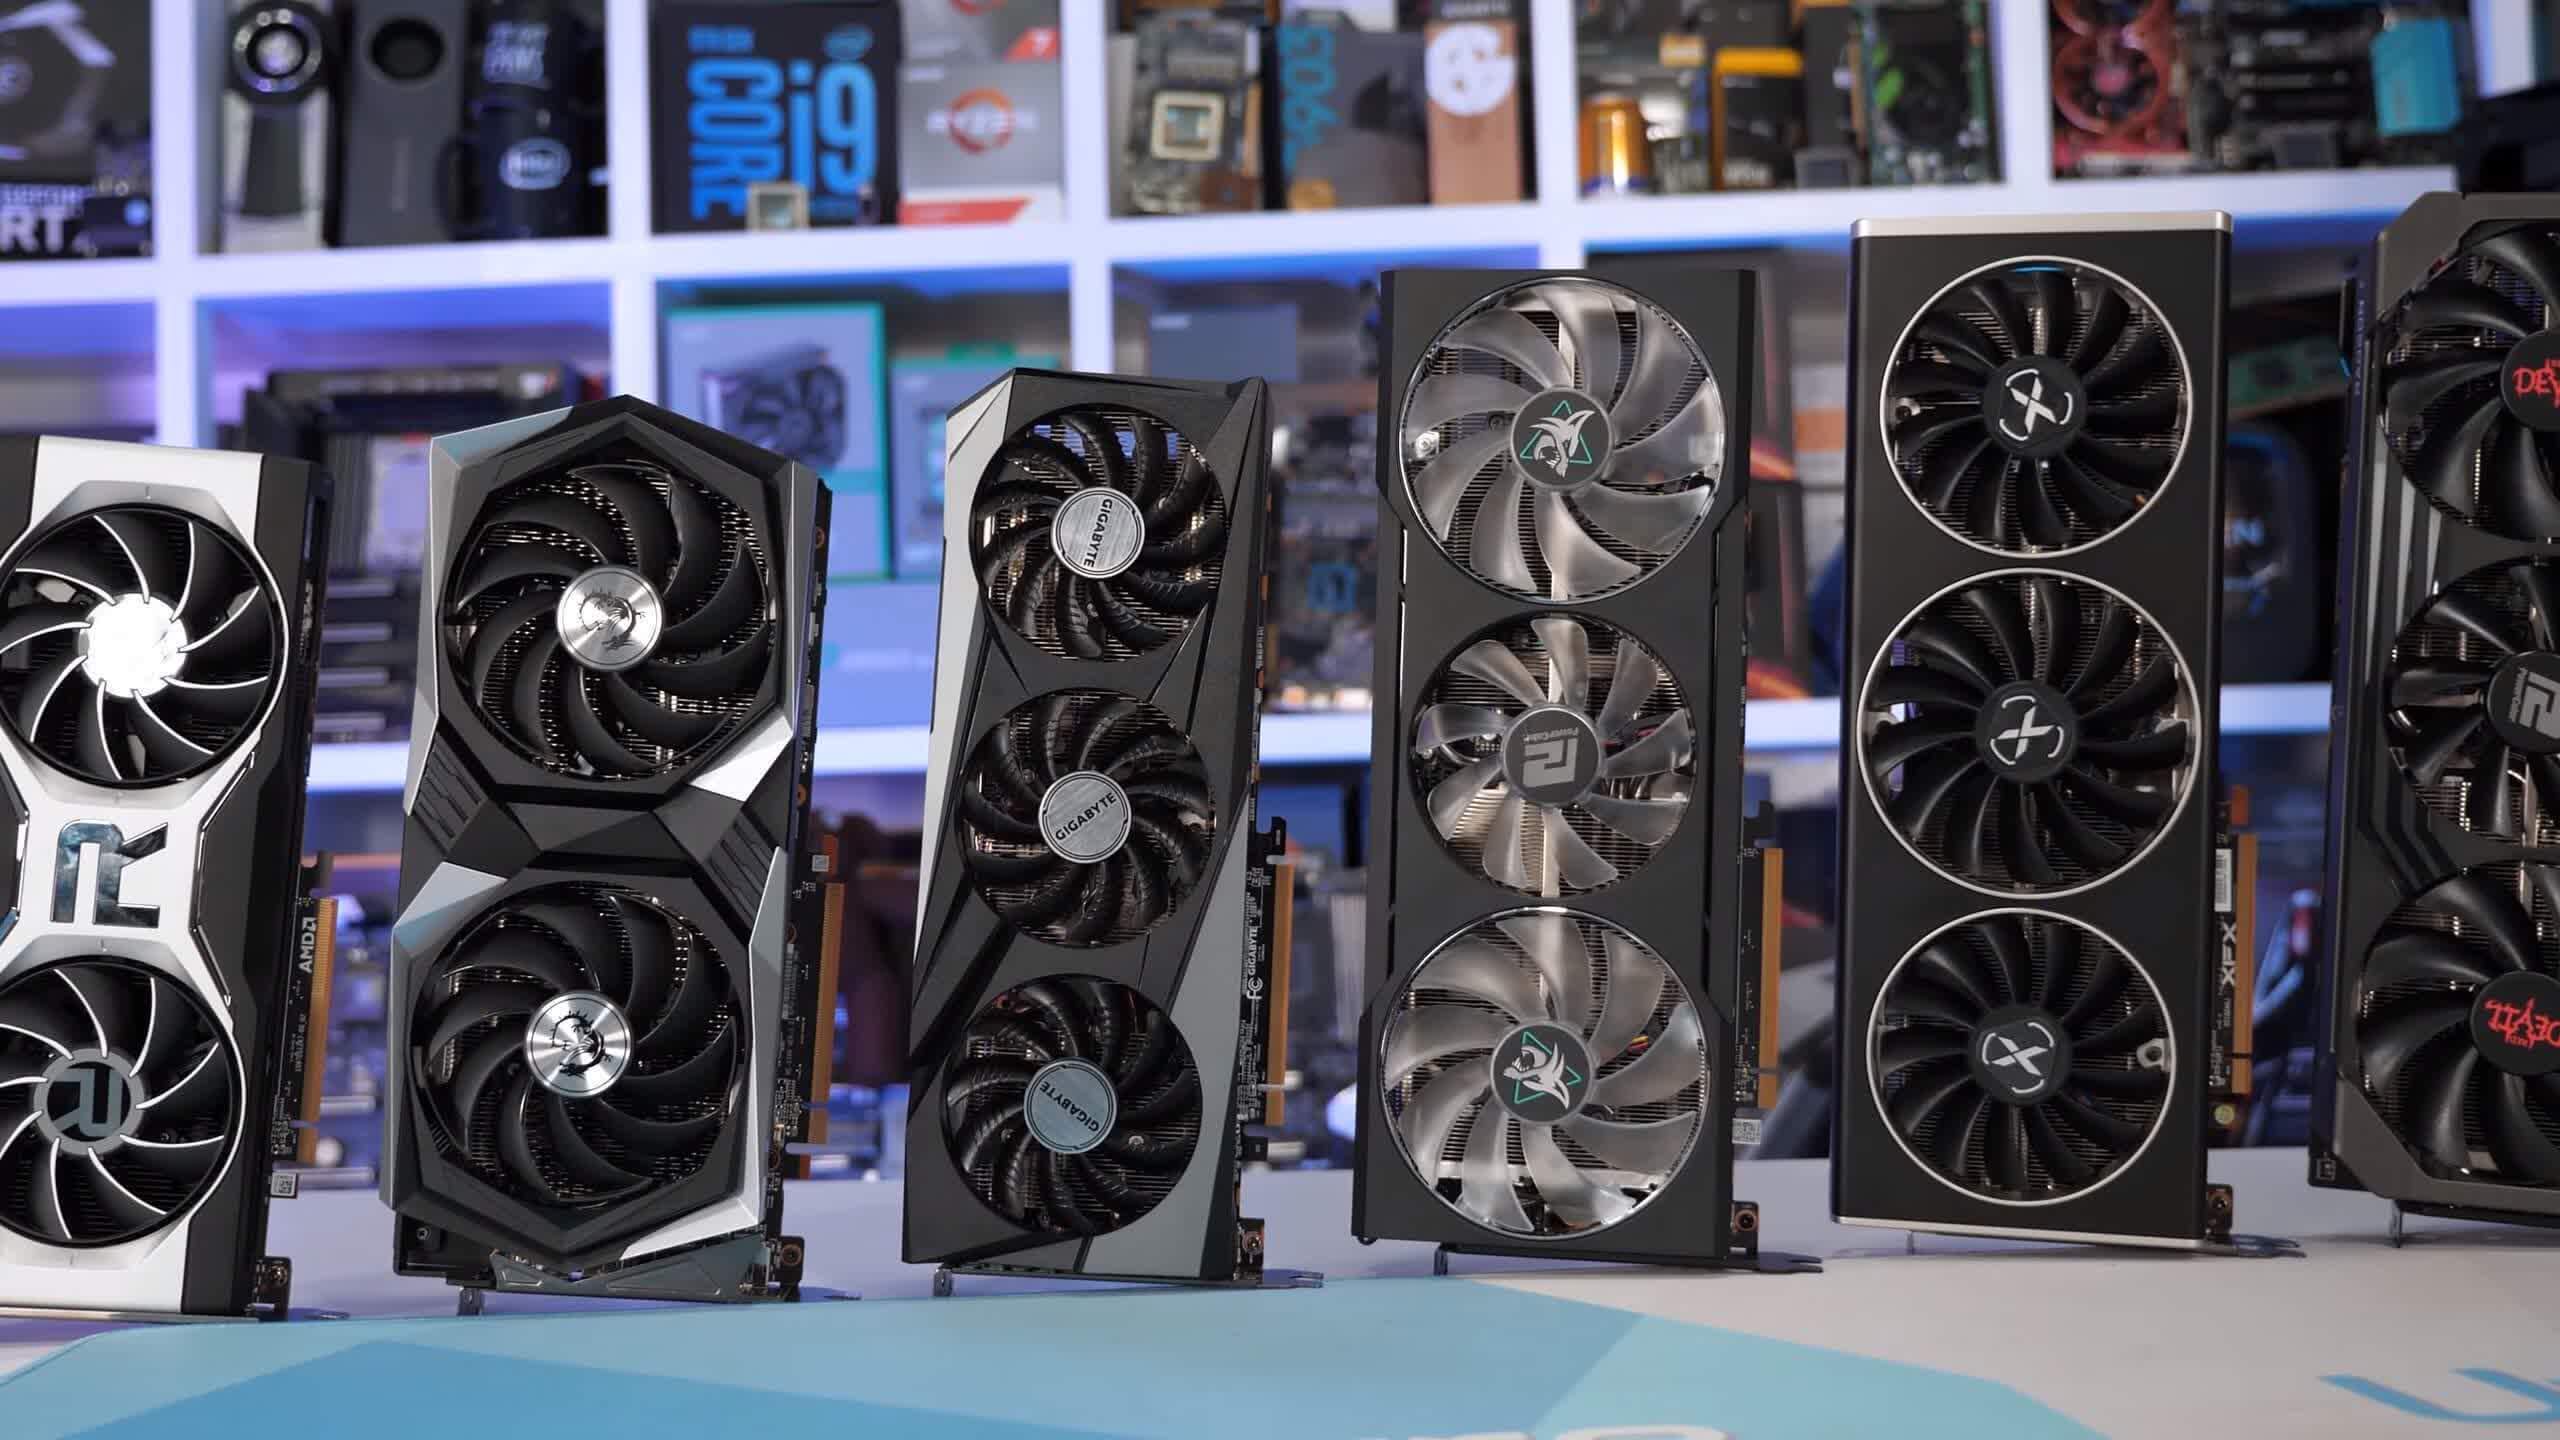 Latest Steam survey shows graphics card deluge, AMD hitting record high, and Windows 11 losing share